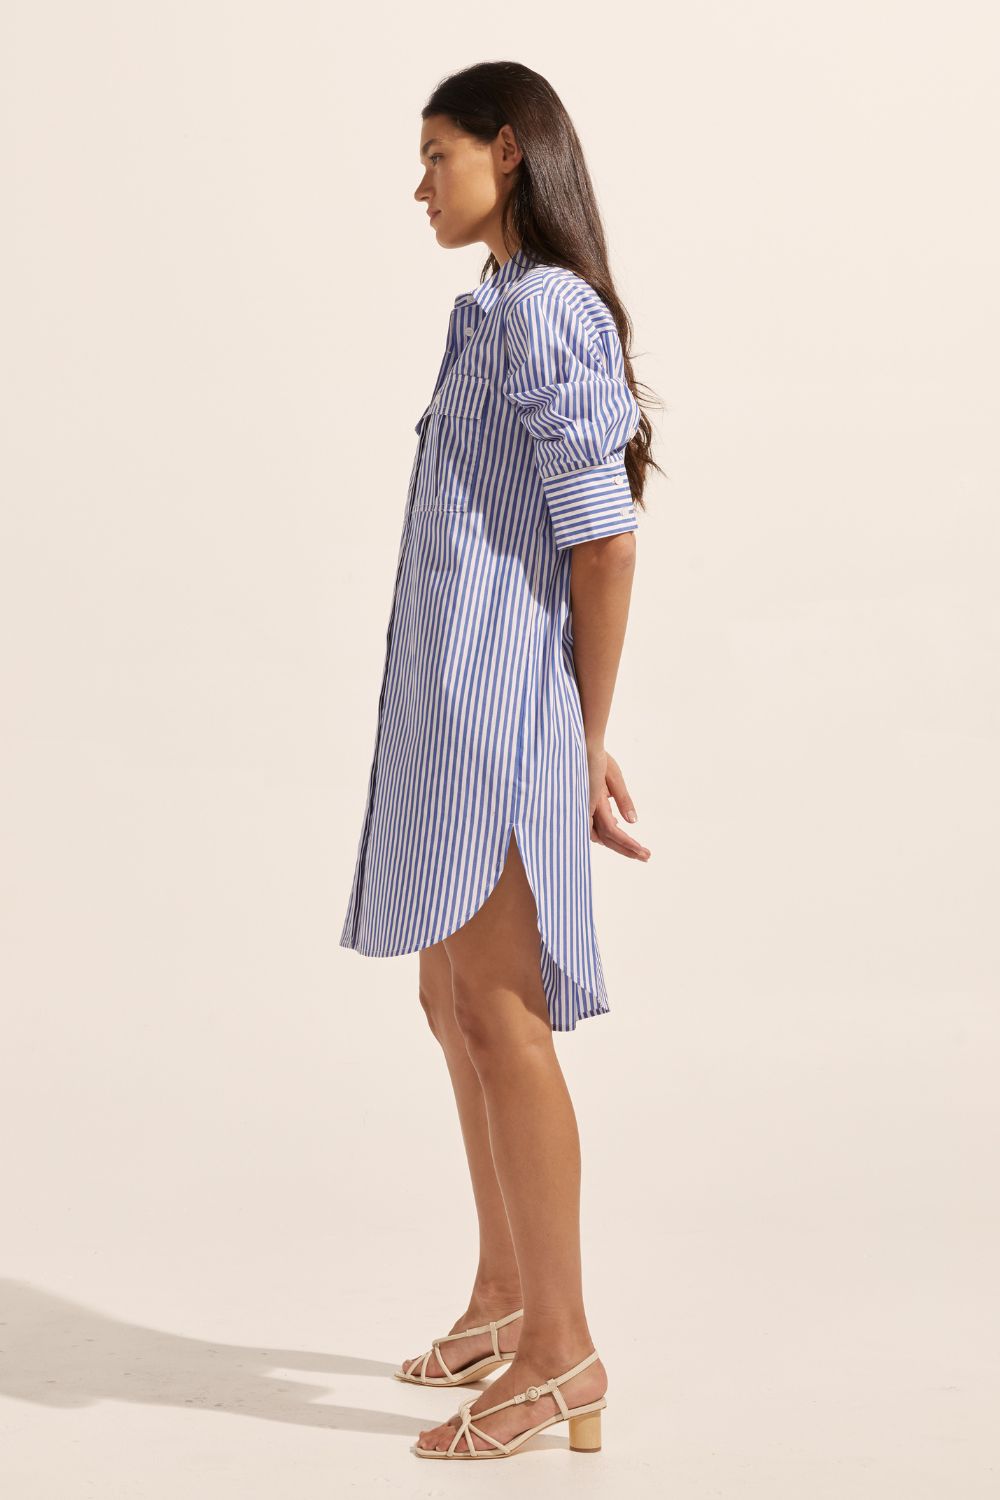 blue and white stripe, mid length sleeve, oversized patch pockets, high-low hemline, buttons down centre, crisp collar, dress, side image